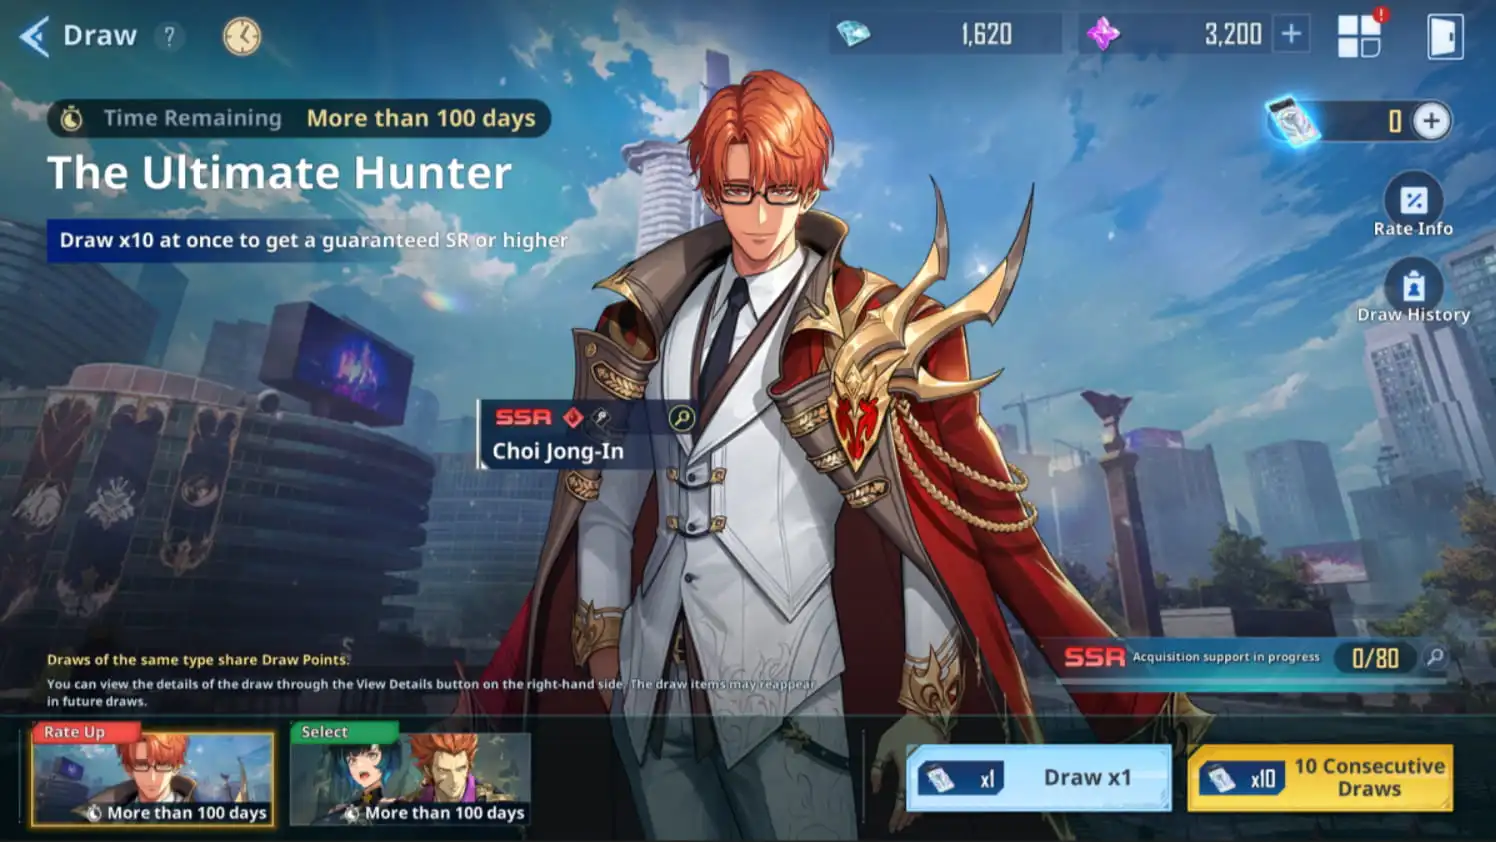 Choi Jong-In is the hunter featured in the current banner. Screenshot by Dot Esports